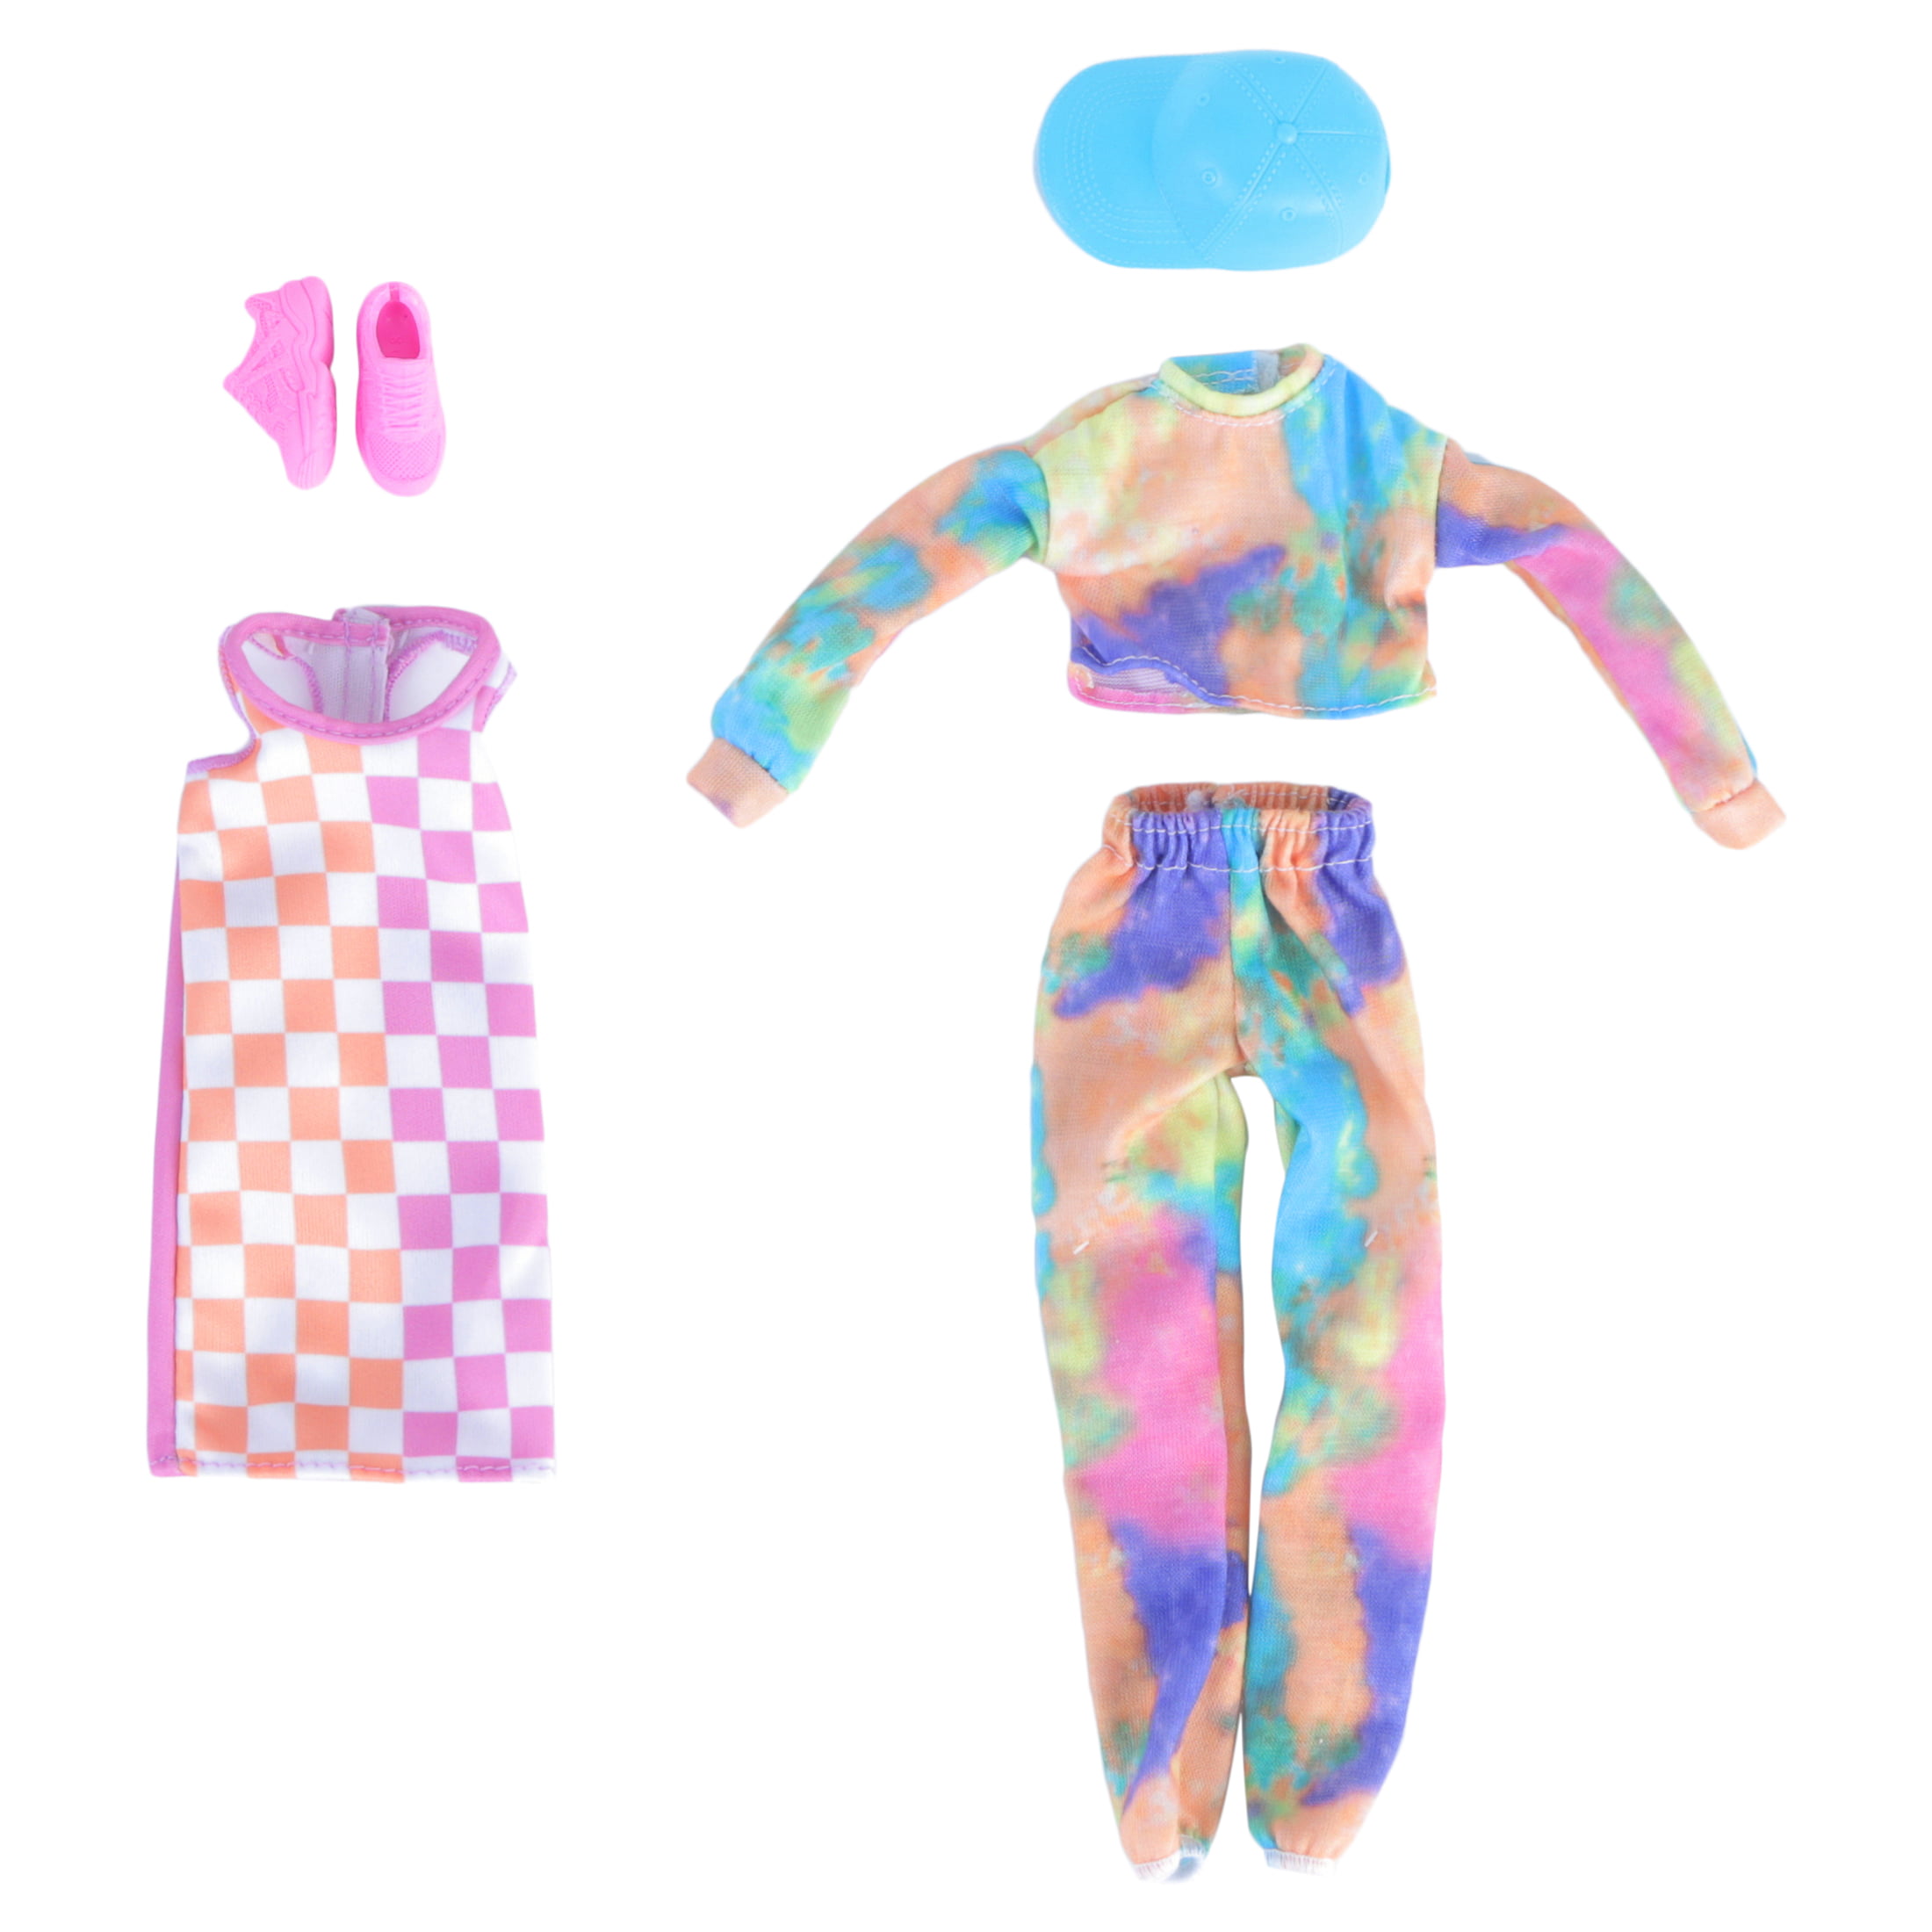 Dolls Clothes Full Outfit Top & Trousers With Shoes Bundle New With Gift Bag 